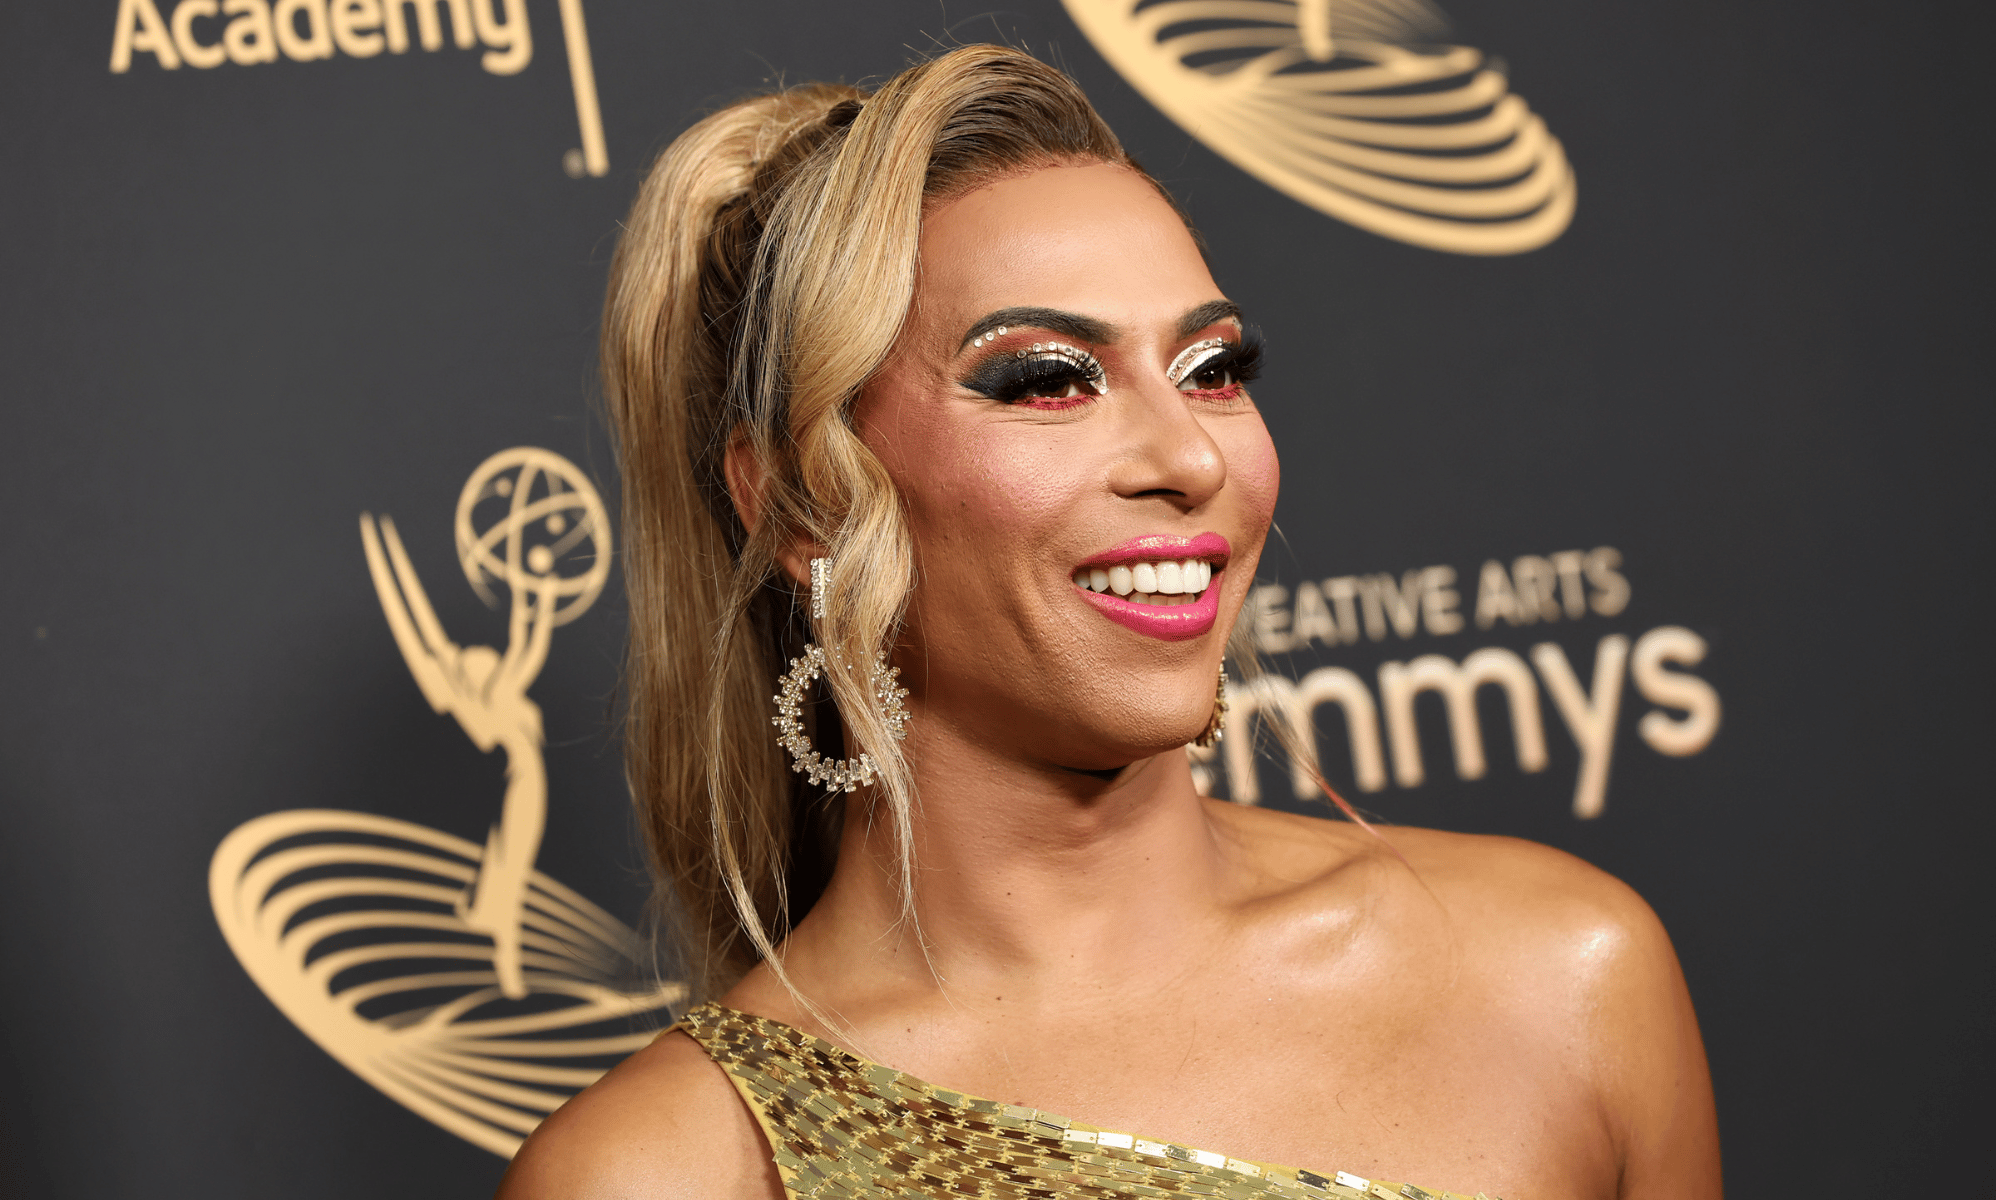 Drag performer Shangela makes 'Dancing With the Stars' history